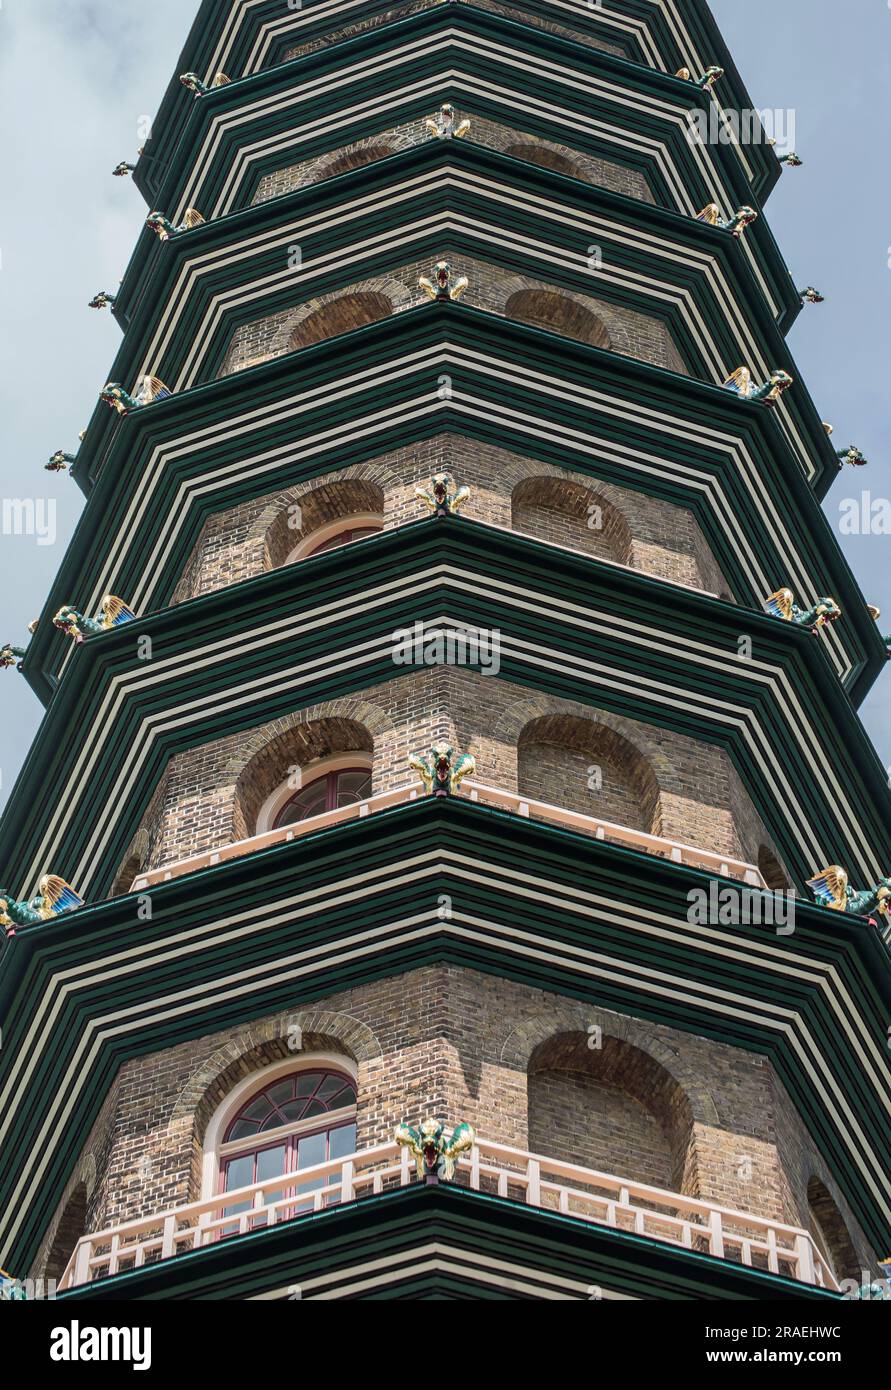 Looking up at The Great Pagoda at Kew Gardens in southwest London, England. The pagoda was constructed by Sir William Chambers in 1761 as a gift to Pr Stock Photo